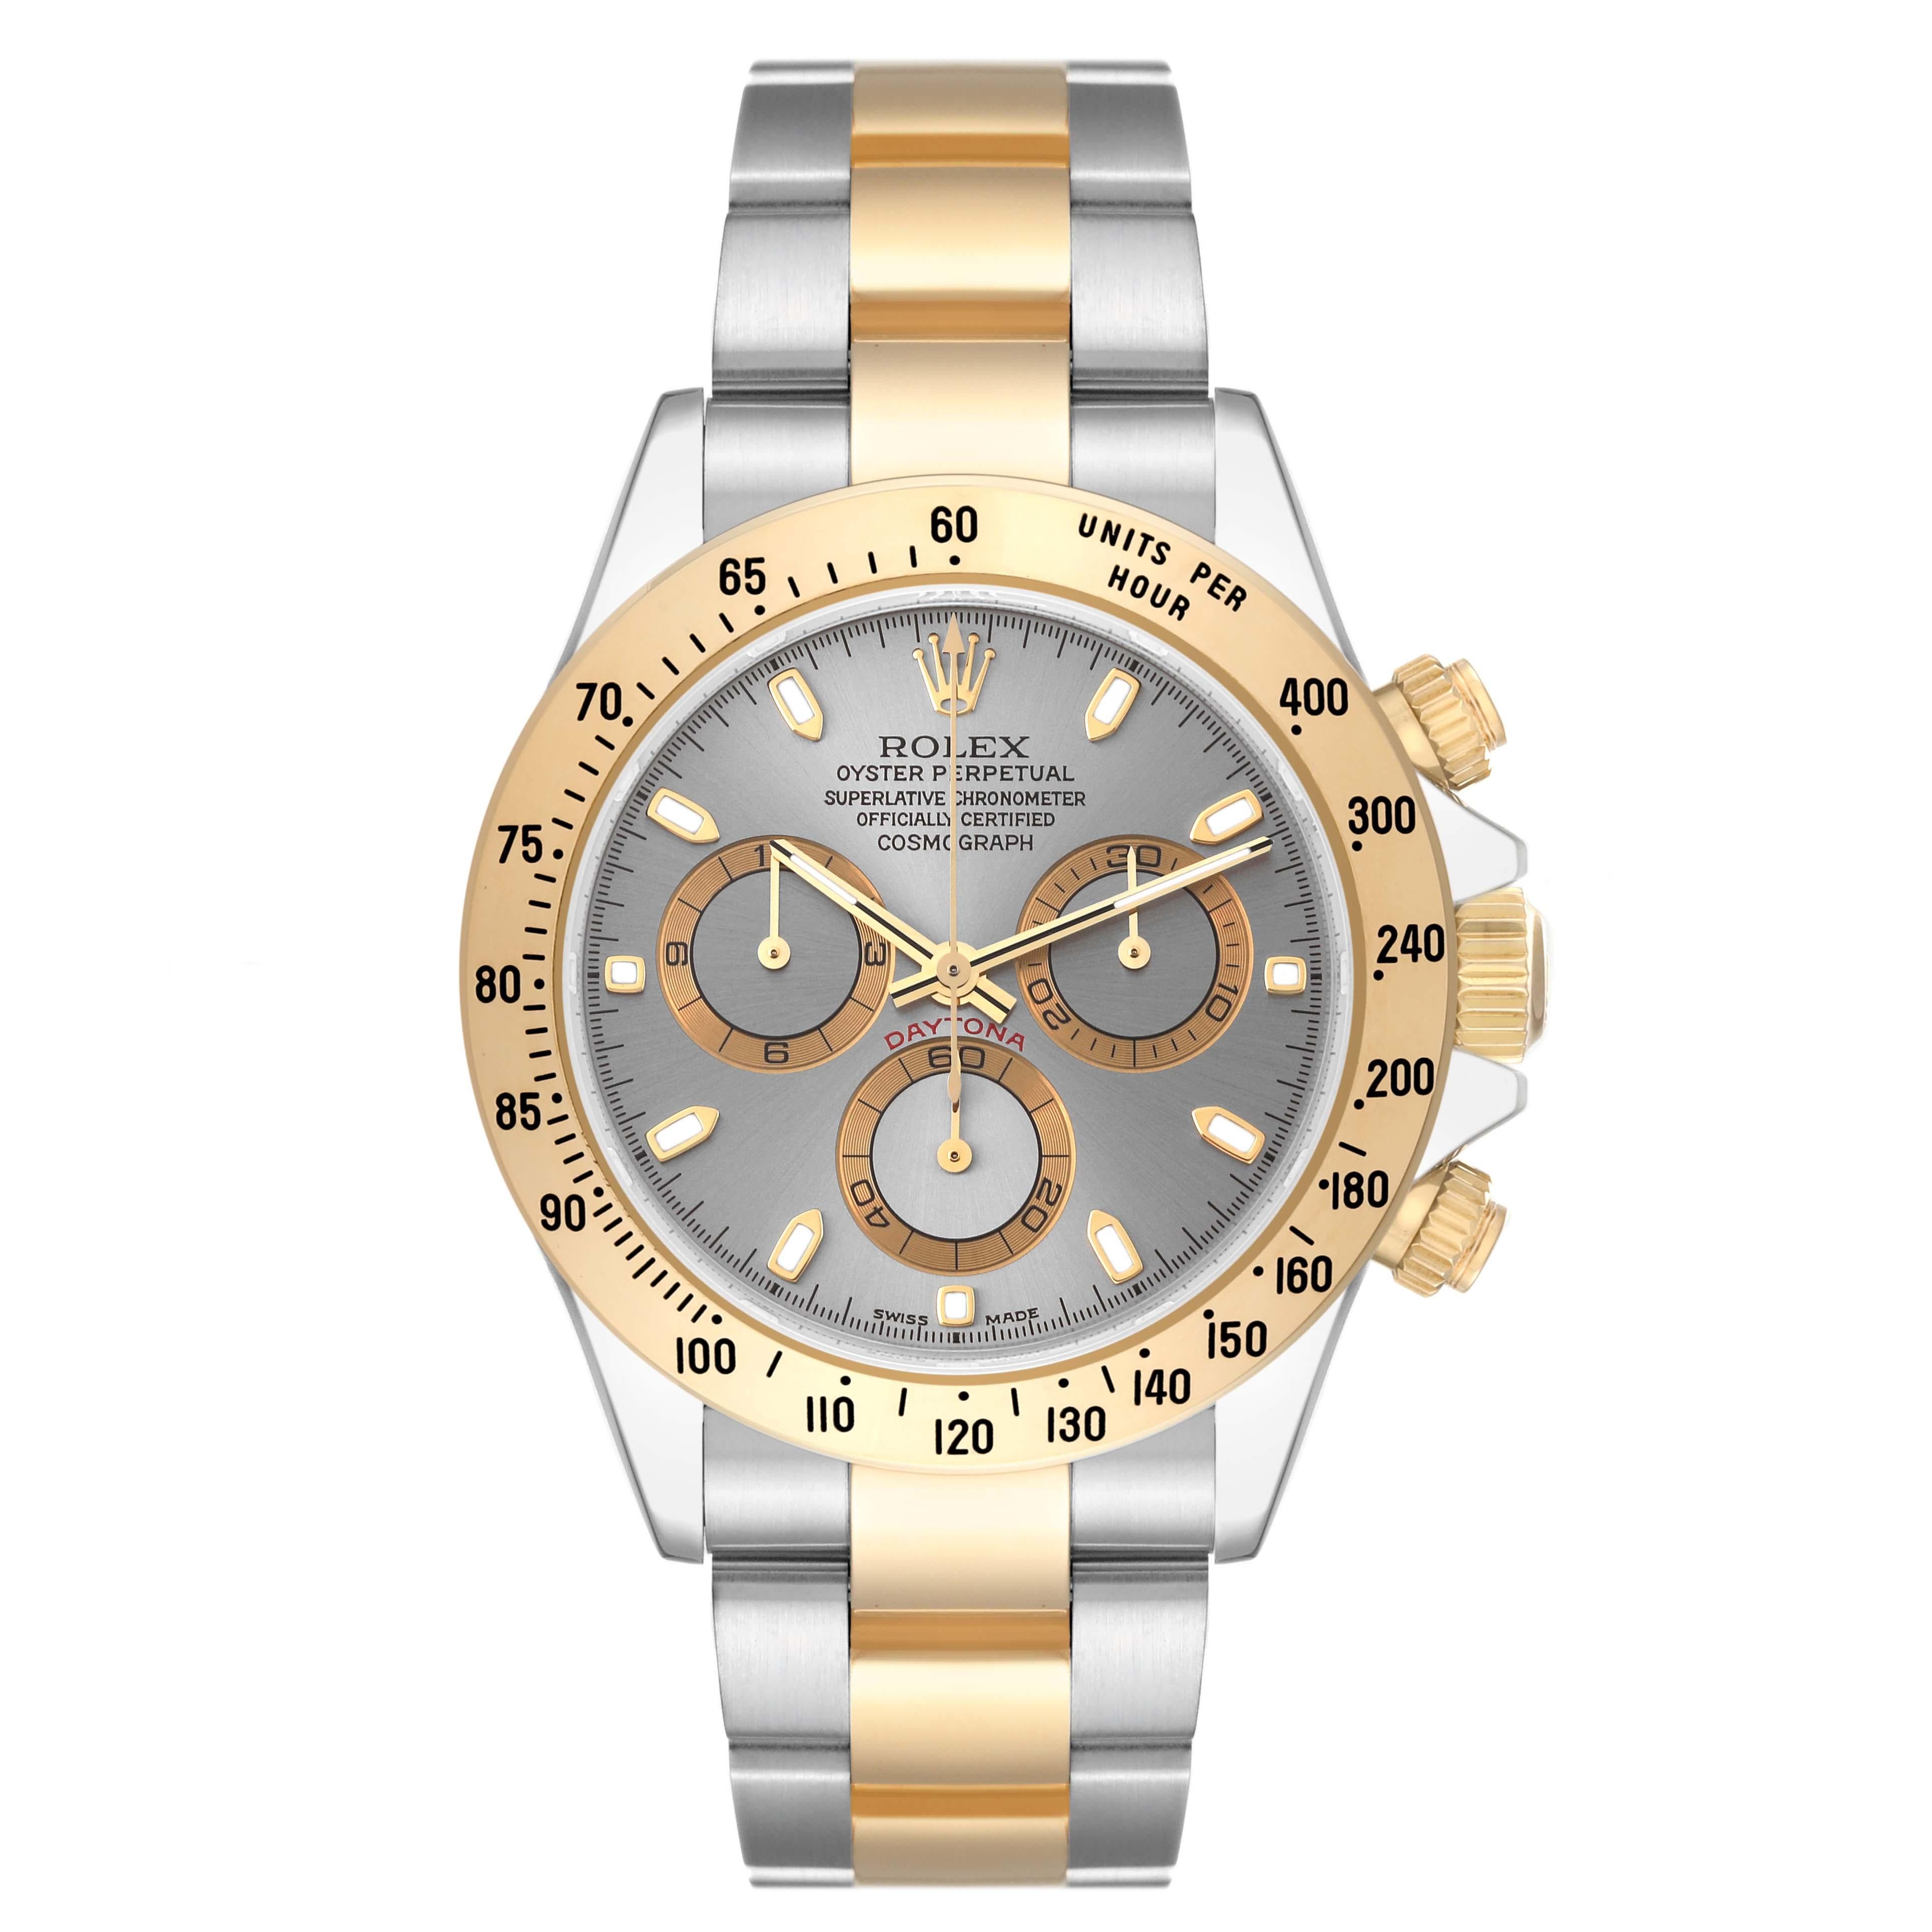 Rolex Daytona Steel Yellow Gold Slate Dial Mens Watch 116523 Box Papers. Officially certified chronometer self-winding movement. Rhodium-plated, oeil-de-perdrix decoration, straight line lever escapement, monometallic balance adjusted to 5